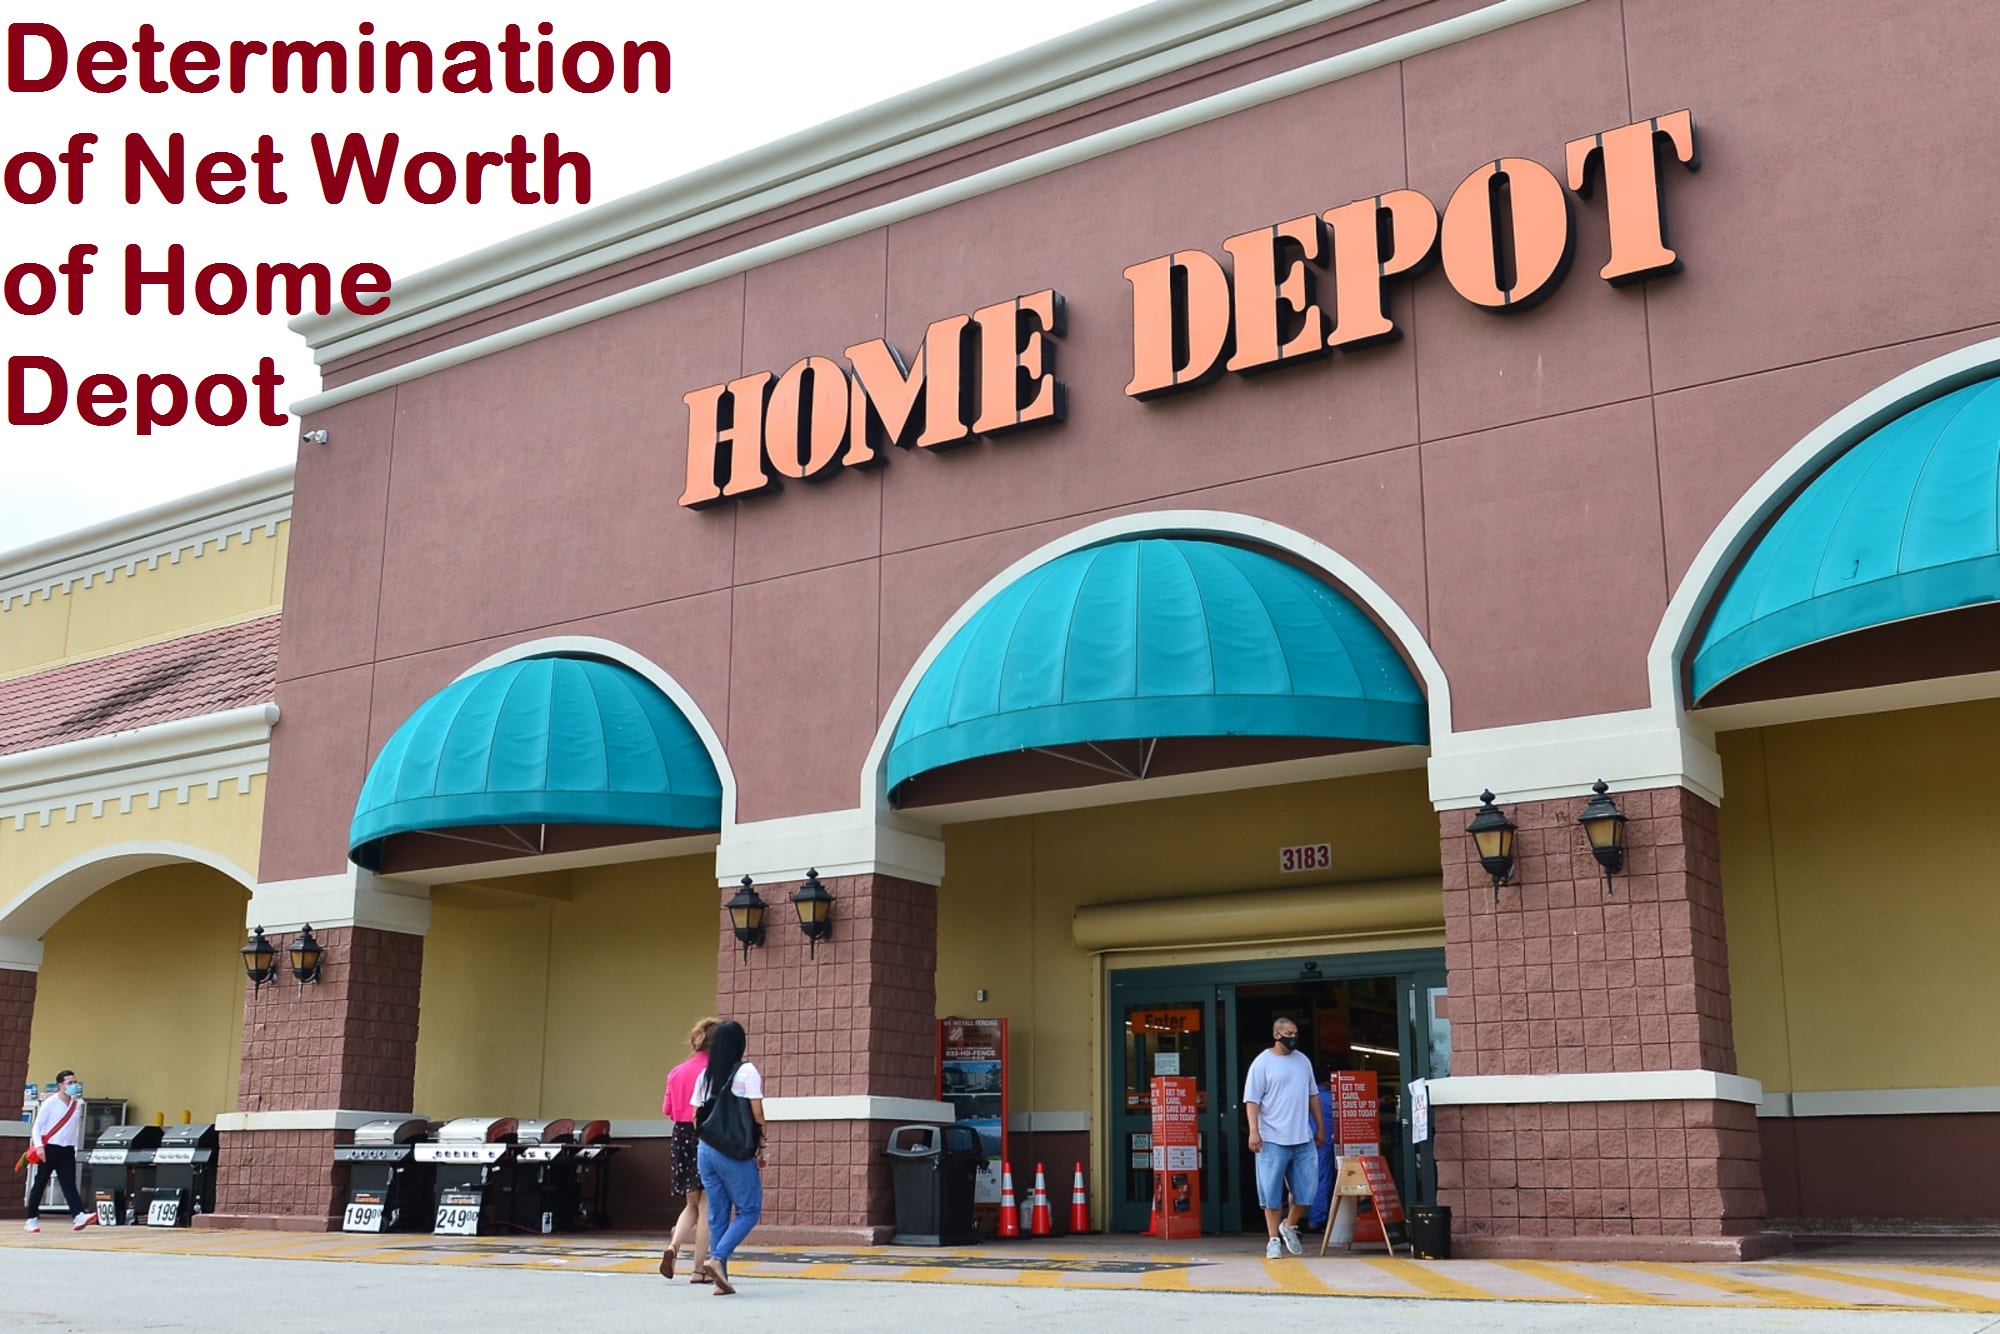 Determination of Net Worth of Home Depot